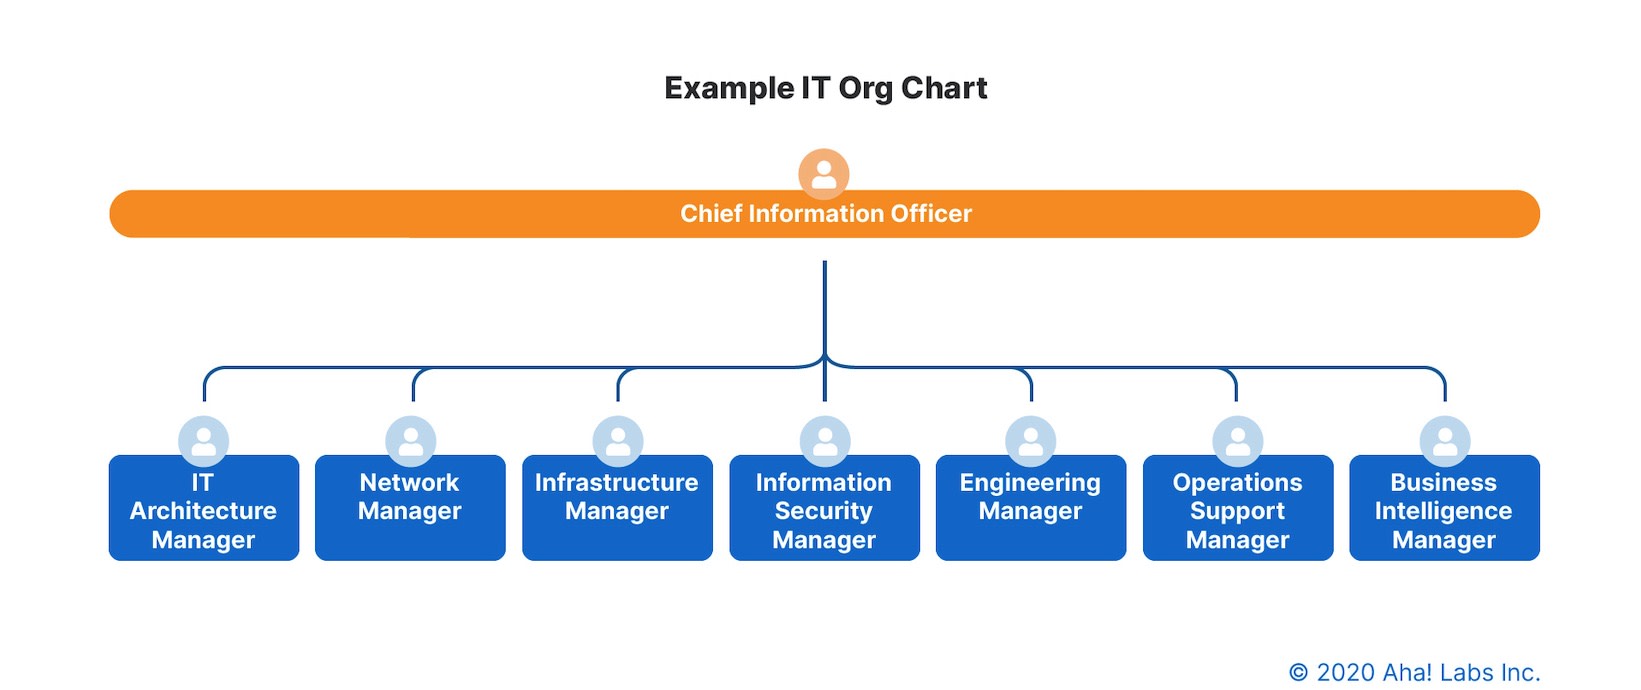 An example of an IT org chart with a Chief Information Officer at the top.